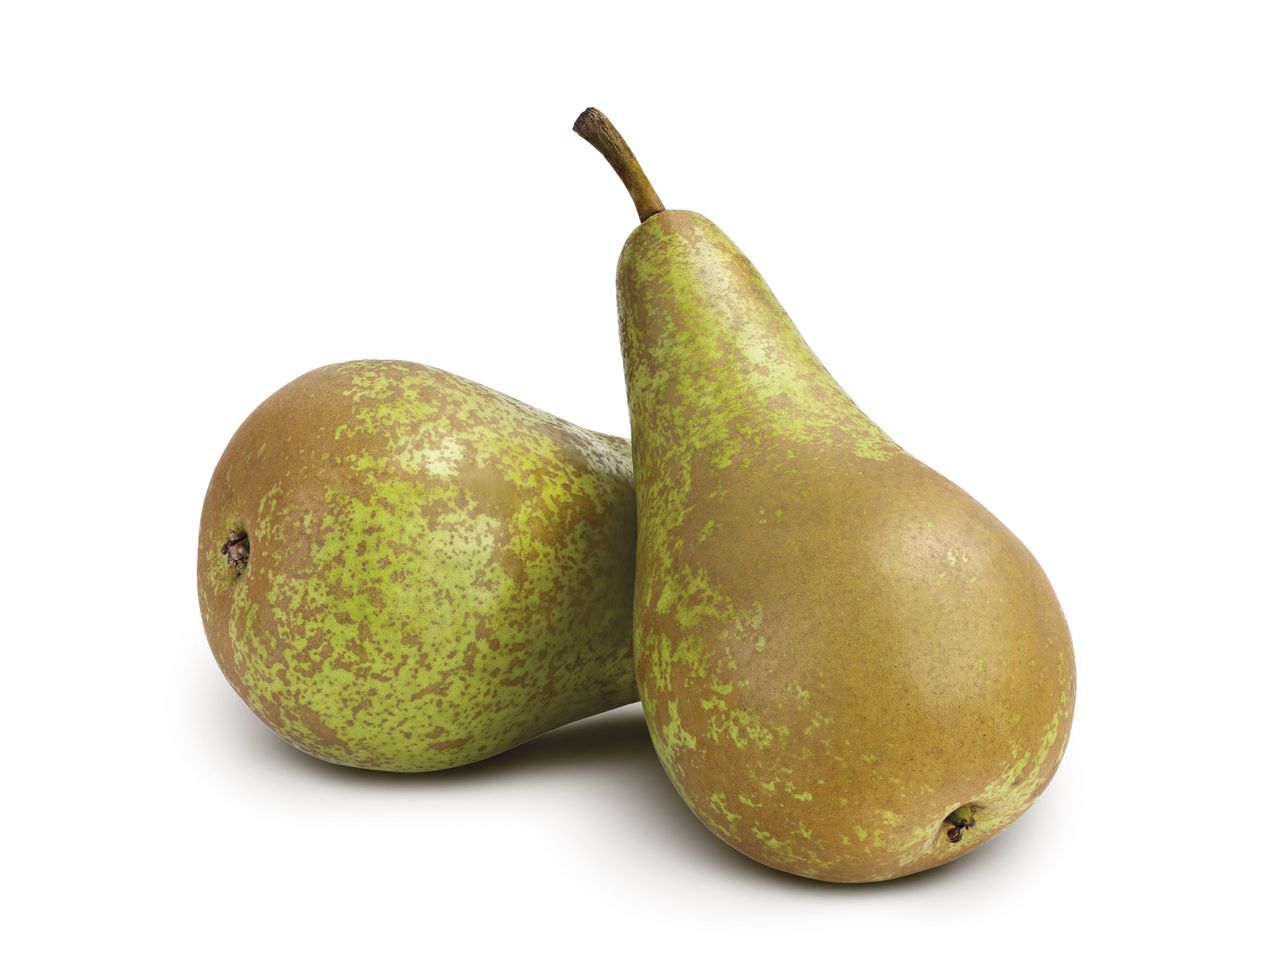 Go to full screen view: Loose Pears - Image 1